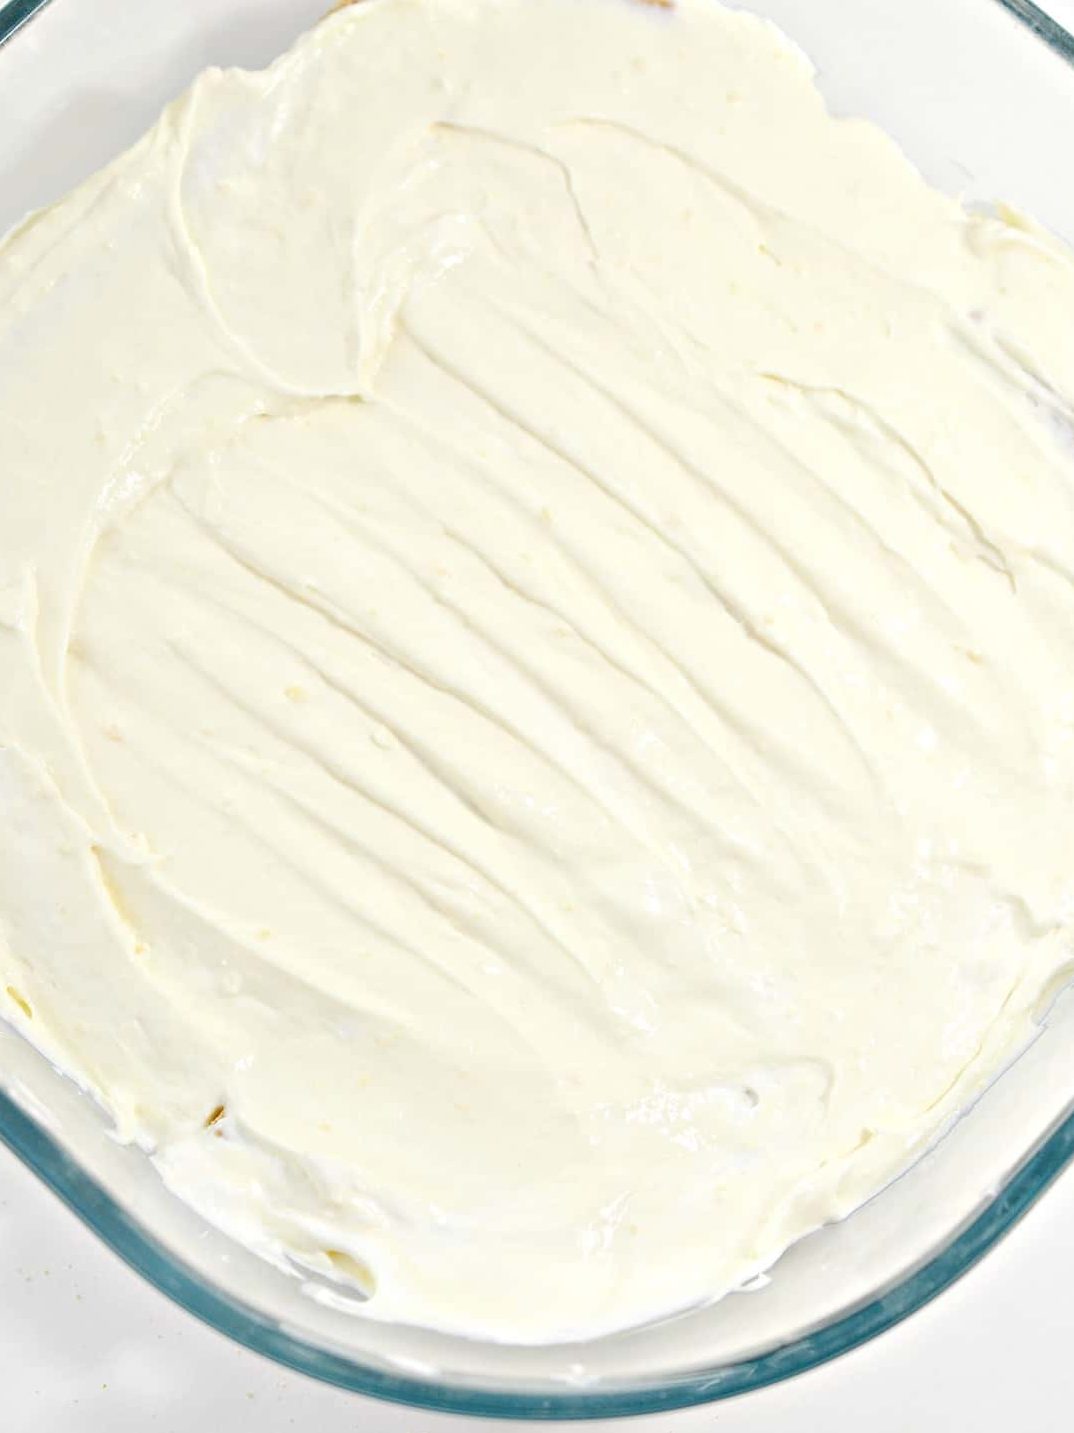 Spread half of the cream cheese mixture over the graham crackers.